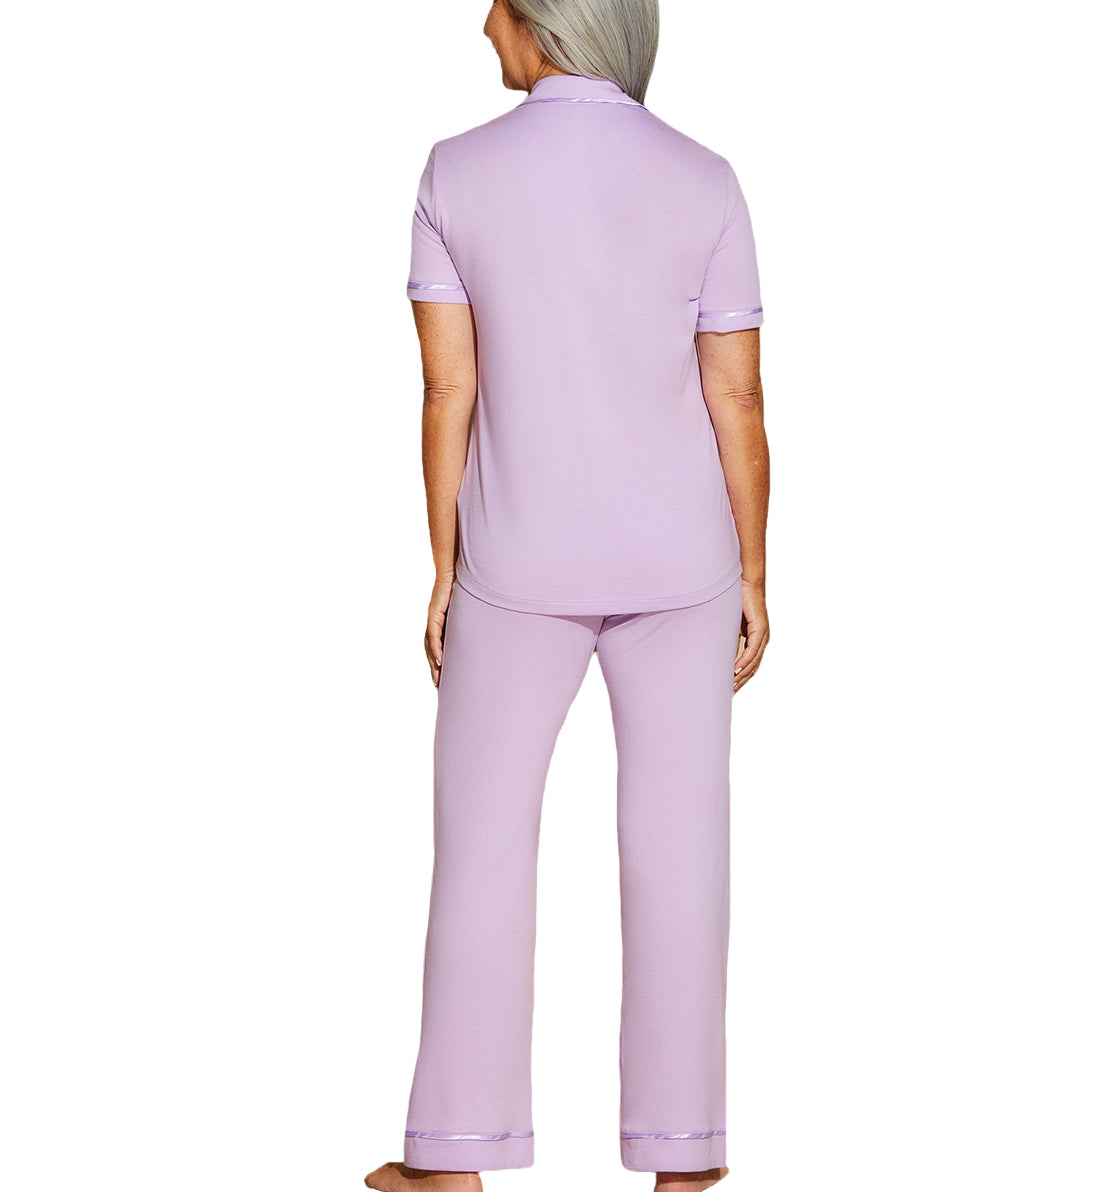 Cosabella Amore Bella Short Sleeve Top &amp; Pant PJ Set (AMORE9645),Small,Icy Violet - Icy Violet,Small